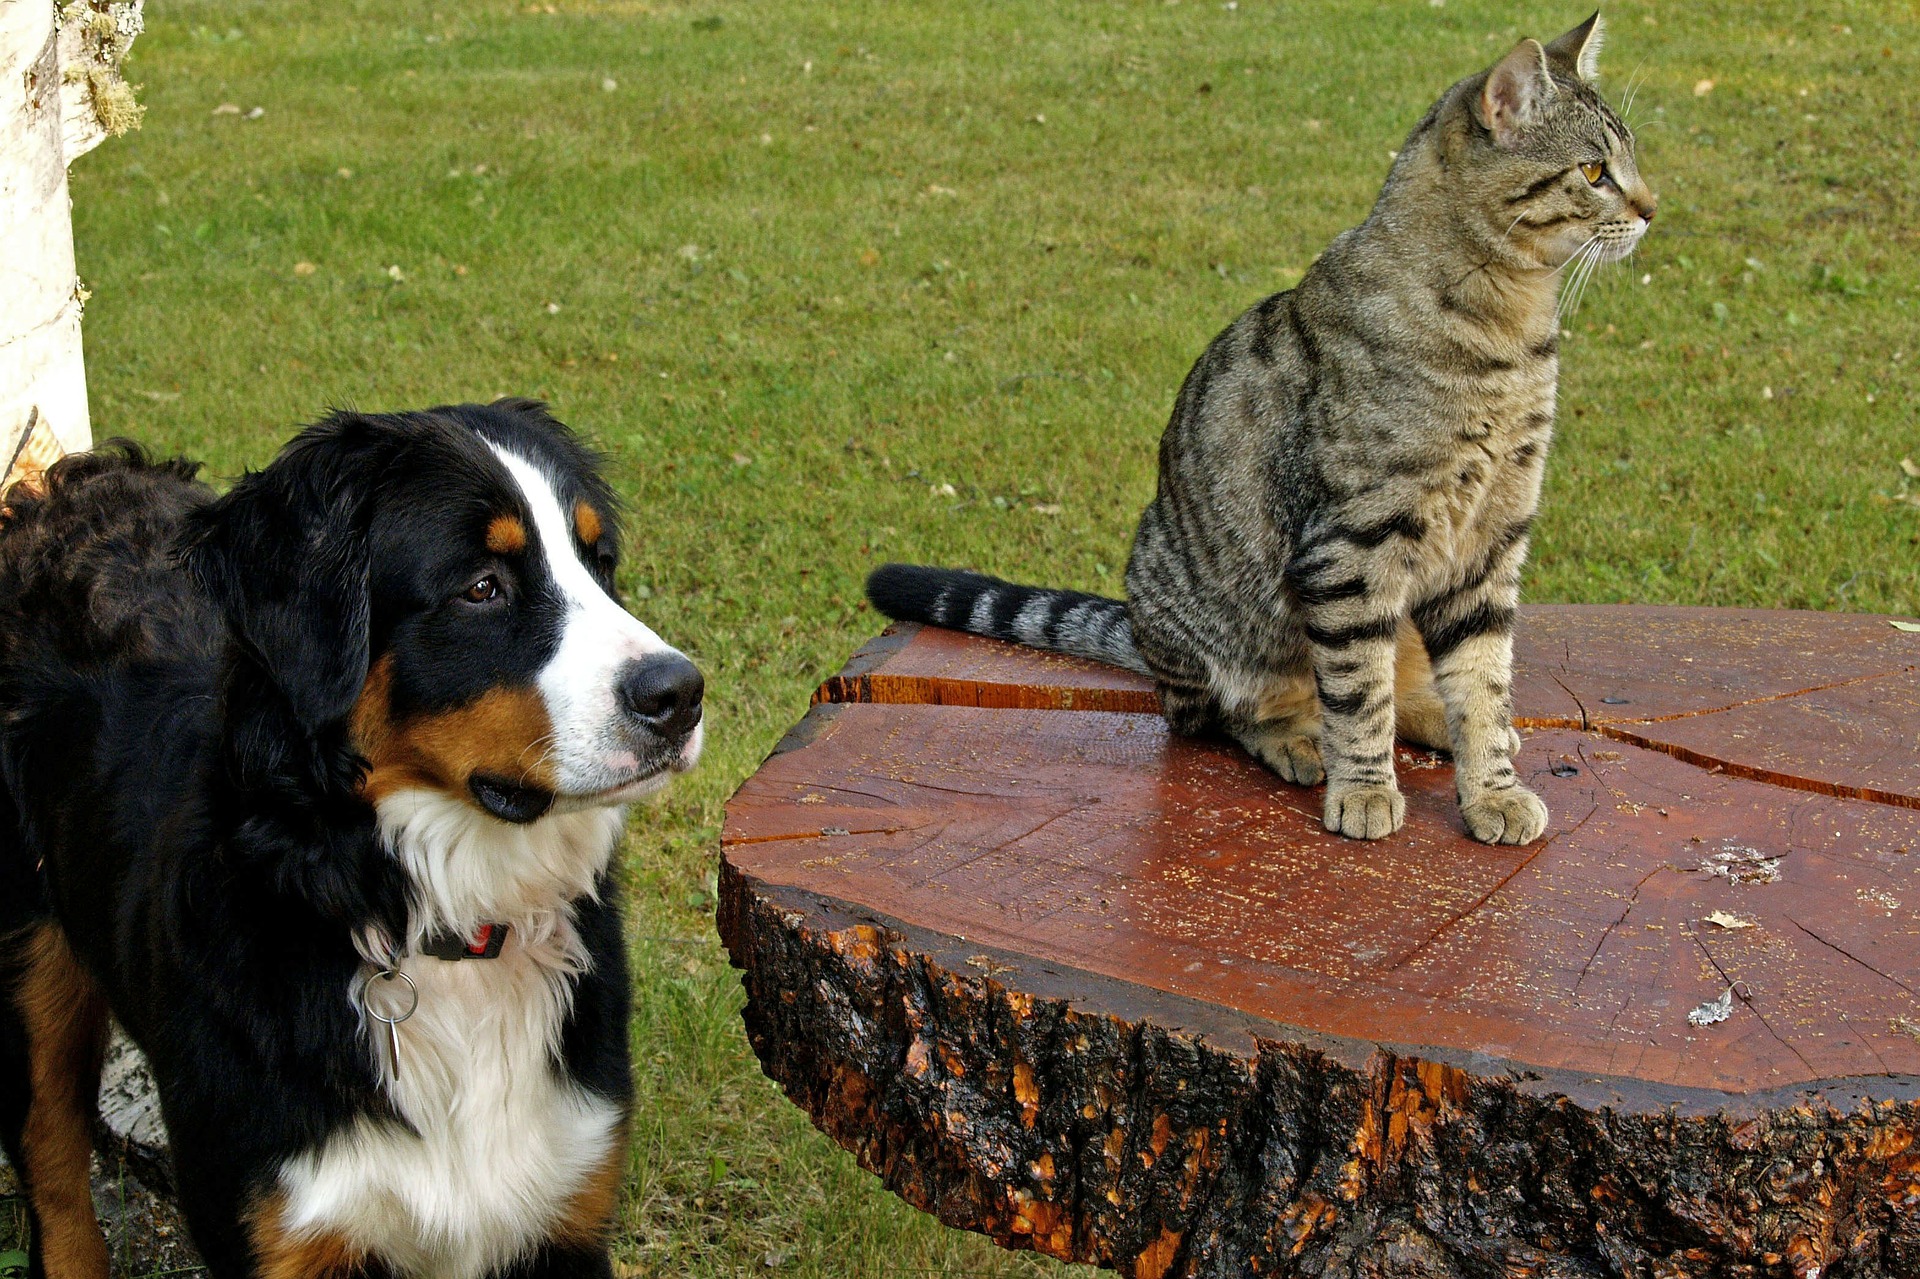 Diabetes on the rise amongst both cats and dogs. It can be controlled with careful management